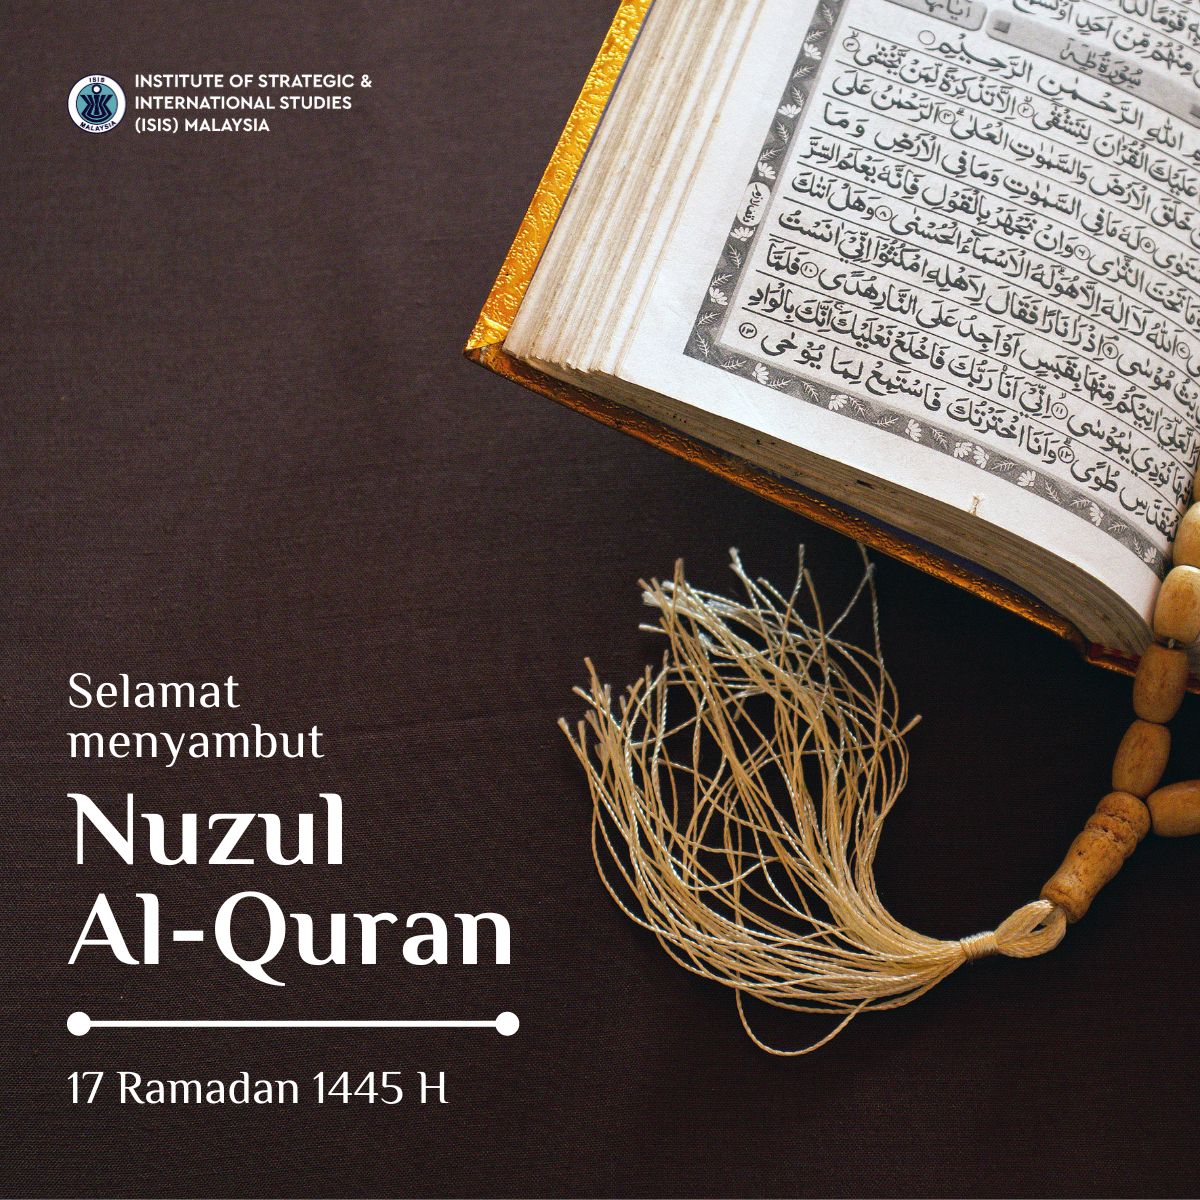 Salam Nuzul Al-Quran kepada seluruh umat Islam. @ISIS_MY extends its warms wishes on this blessed day.